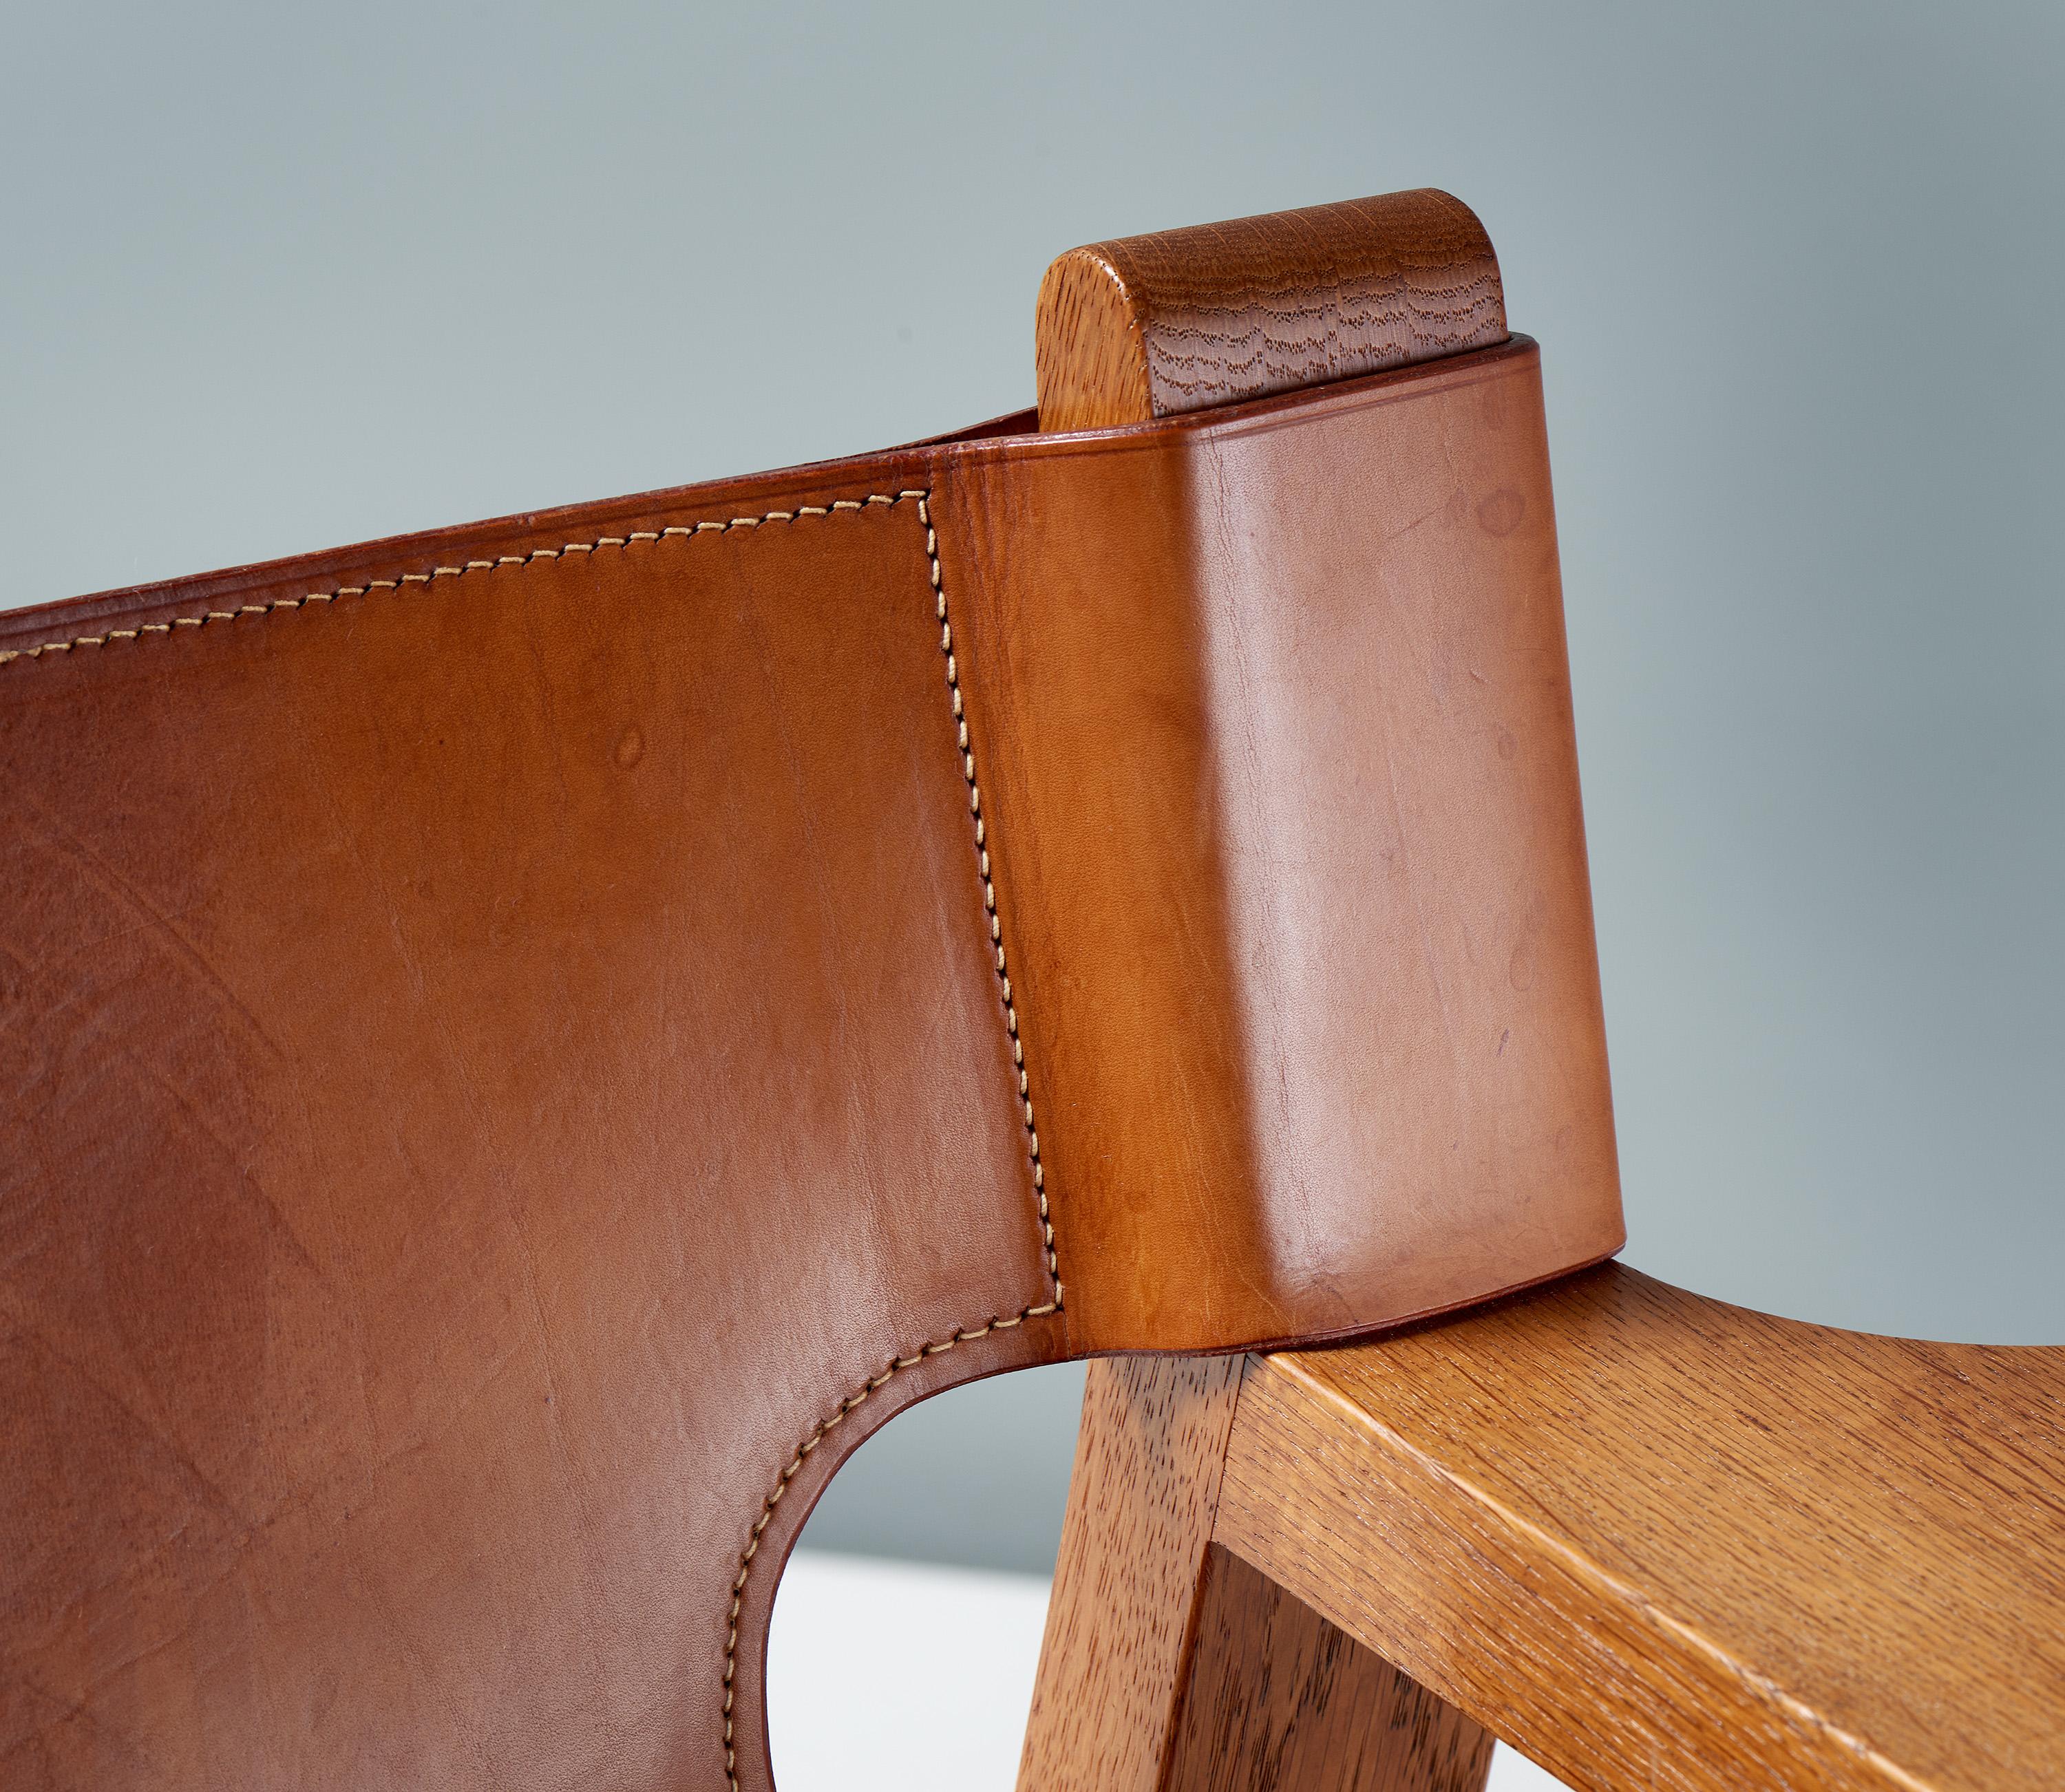 Børge Mogensen Spanish Chair, Oak and Leather, 1958 In Good Condition For Sale In London, GB